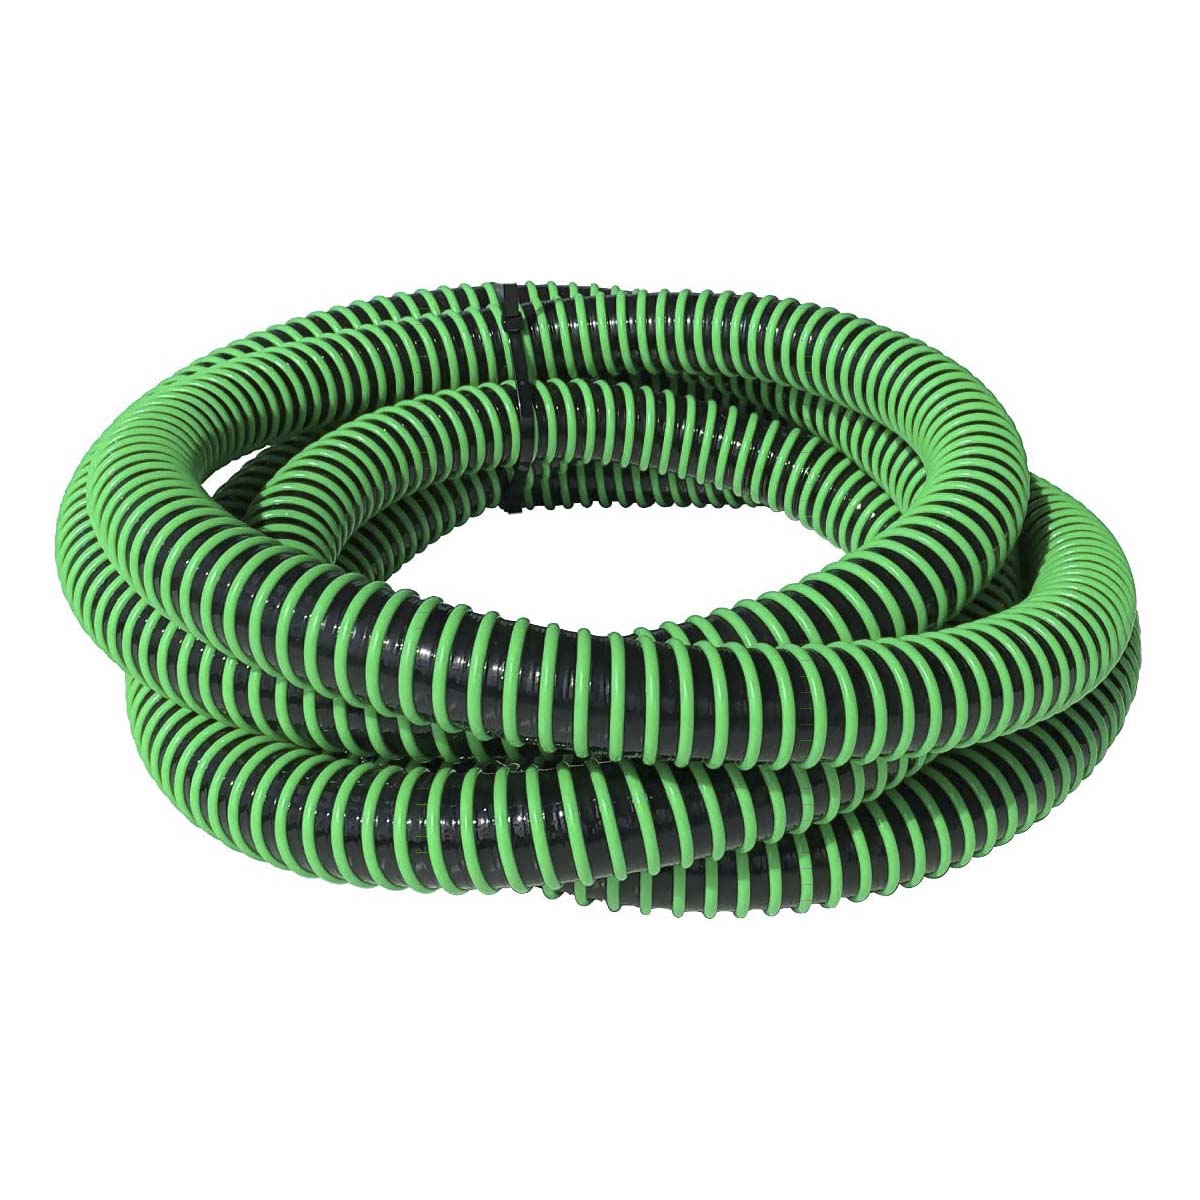 2" x 20ft EPDM Rubber Pin Lug Suction Hose With FREE SHIPPING!!!!! 